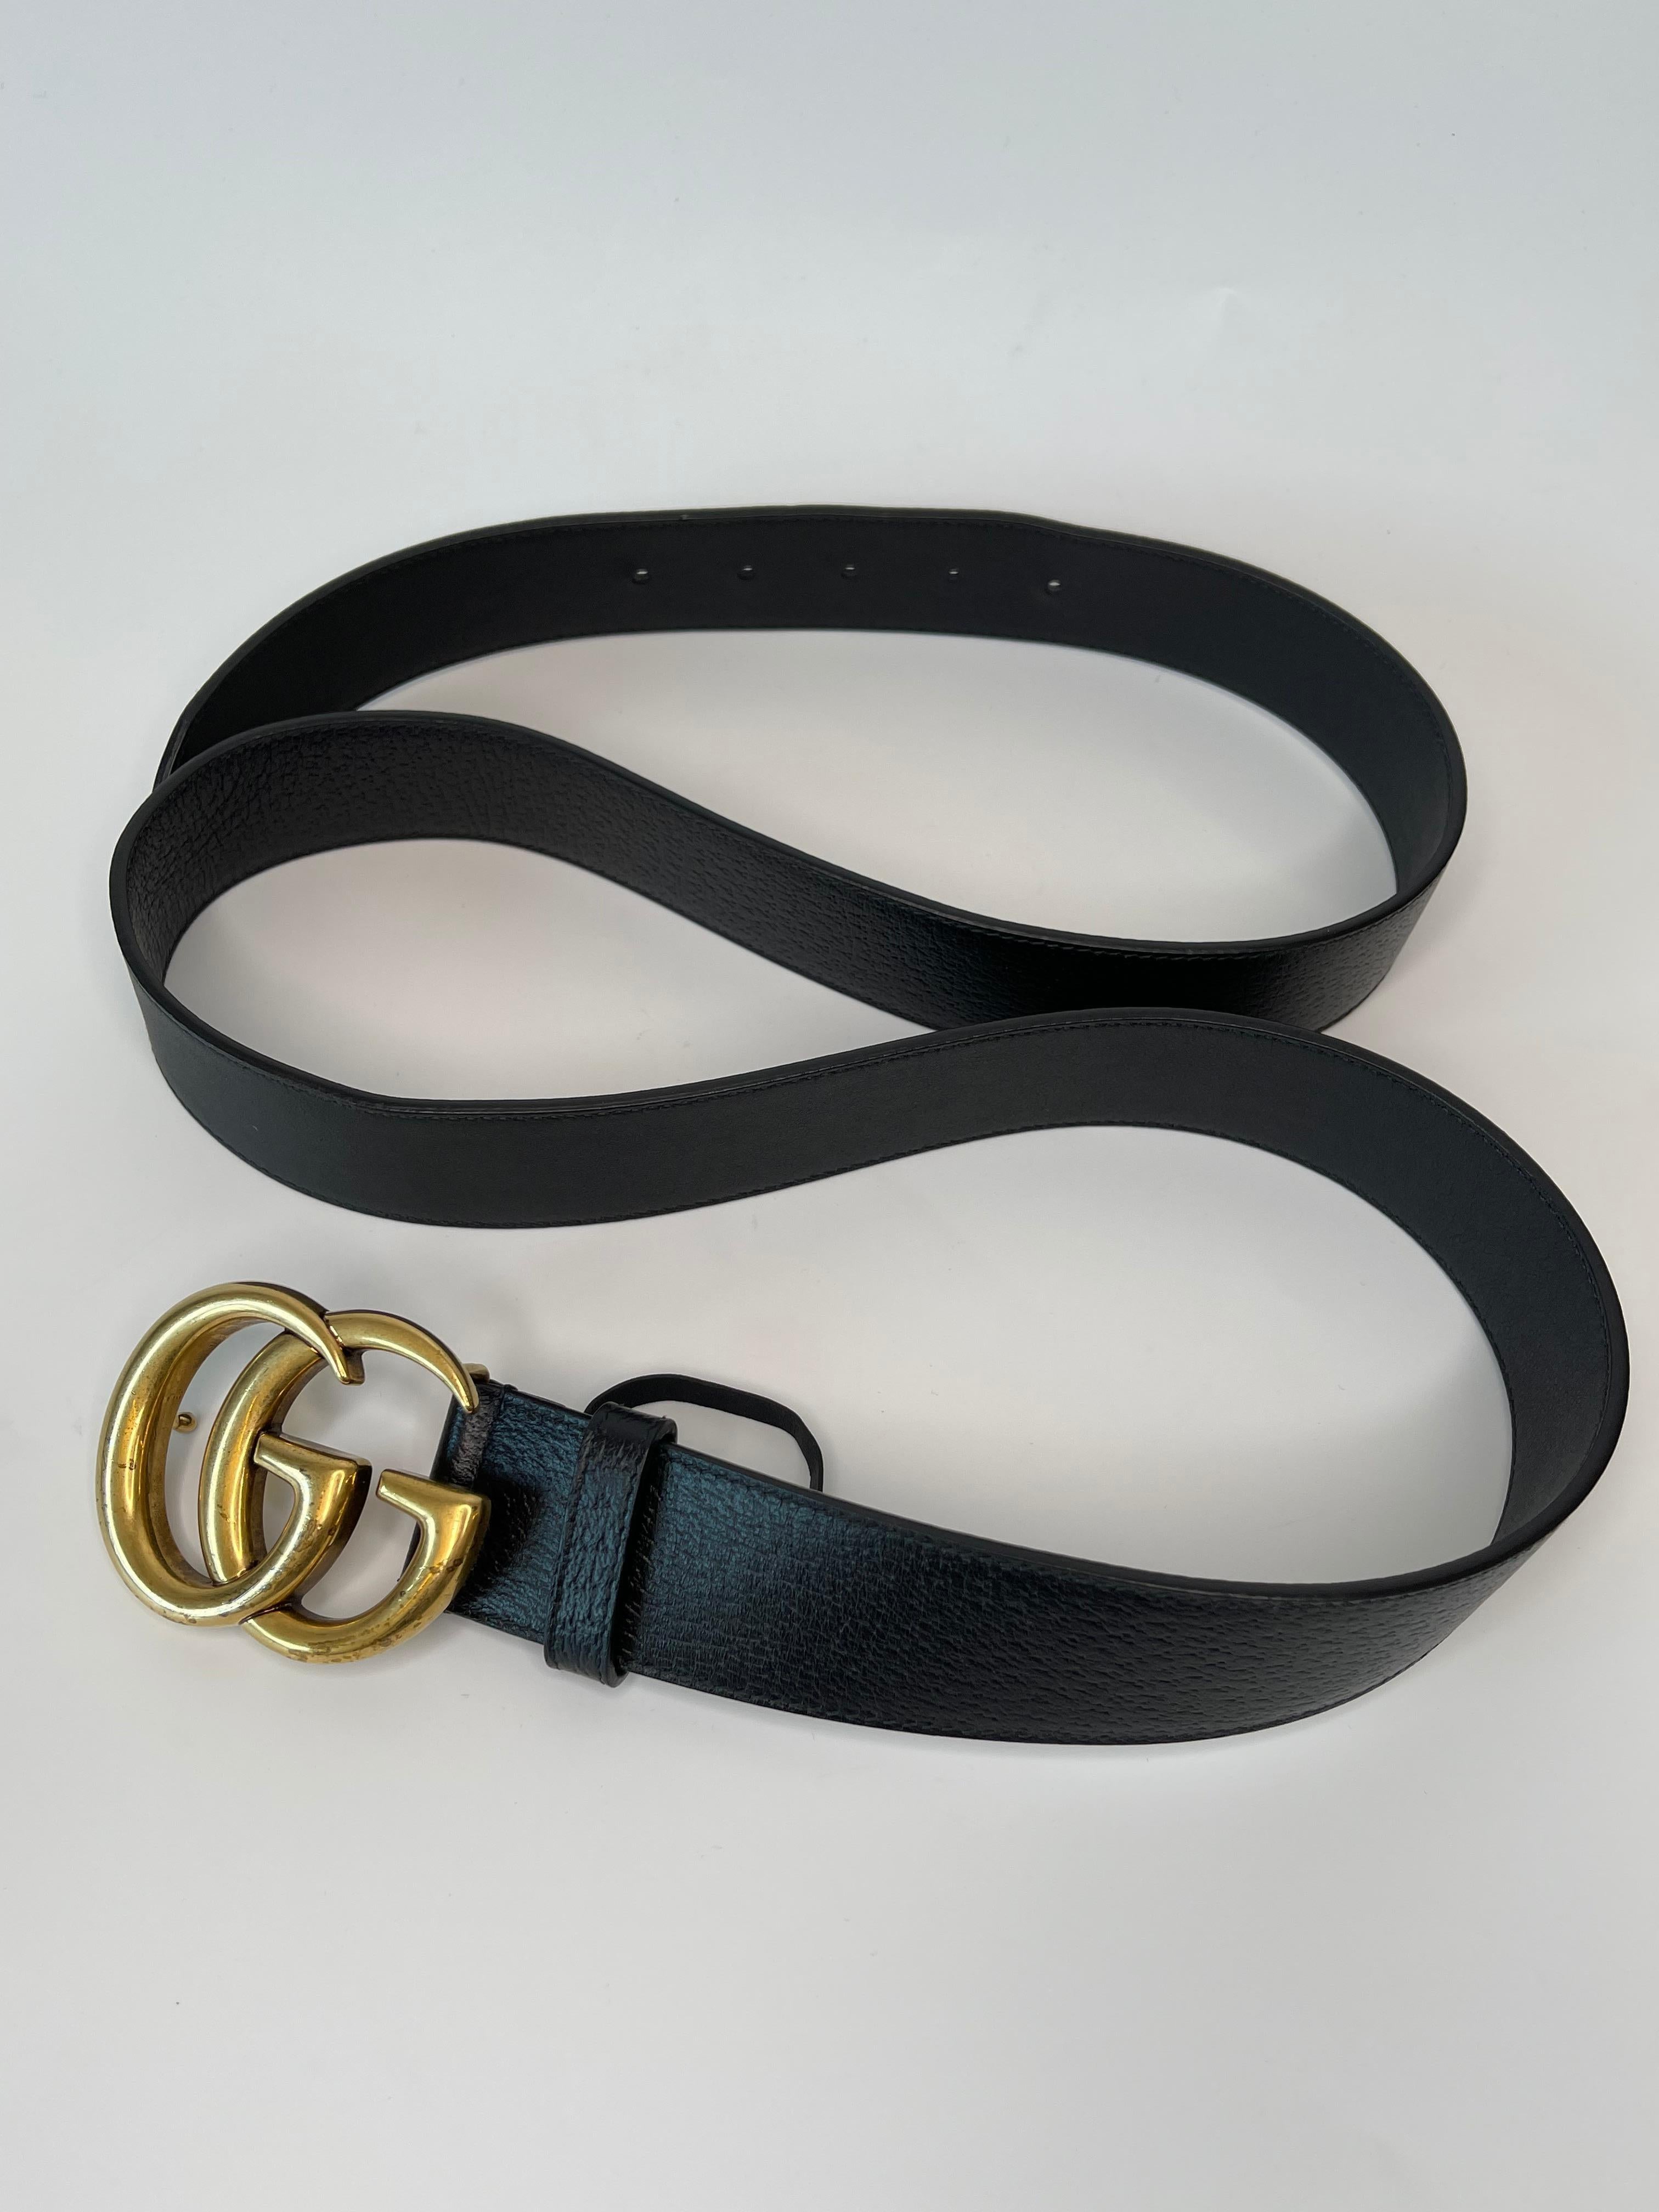 This belt is made with calfskin leather in black and features an aged gold interlocking GG buckle. 

COLOR: Black
ITEM CODE: 406831-DJ20T
MATERIAL: Leather
MEASURES: L 51” x W 1.5”
SIZE: 115/46
COMES WITH: Gucci box, dust bag.
CONDITION: Good